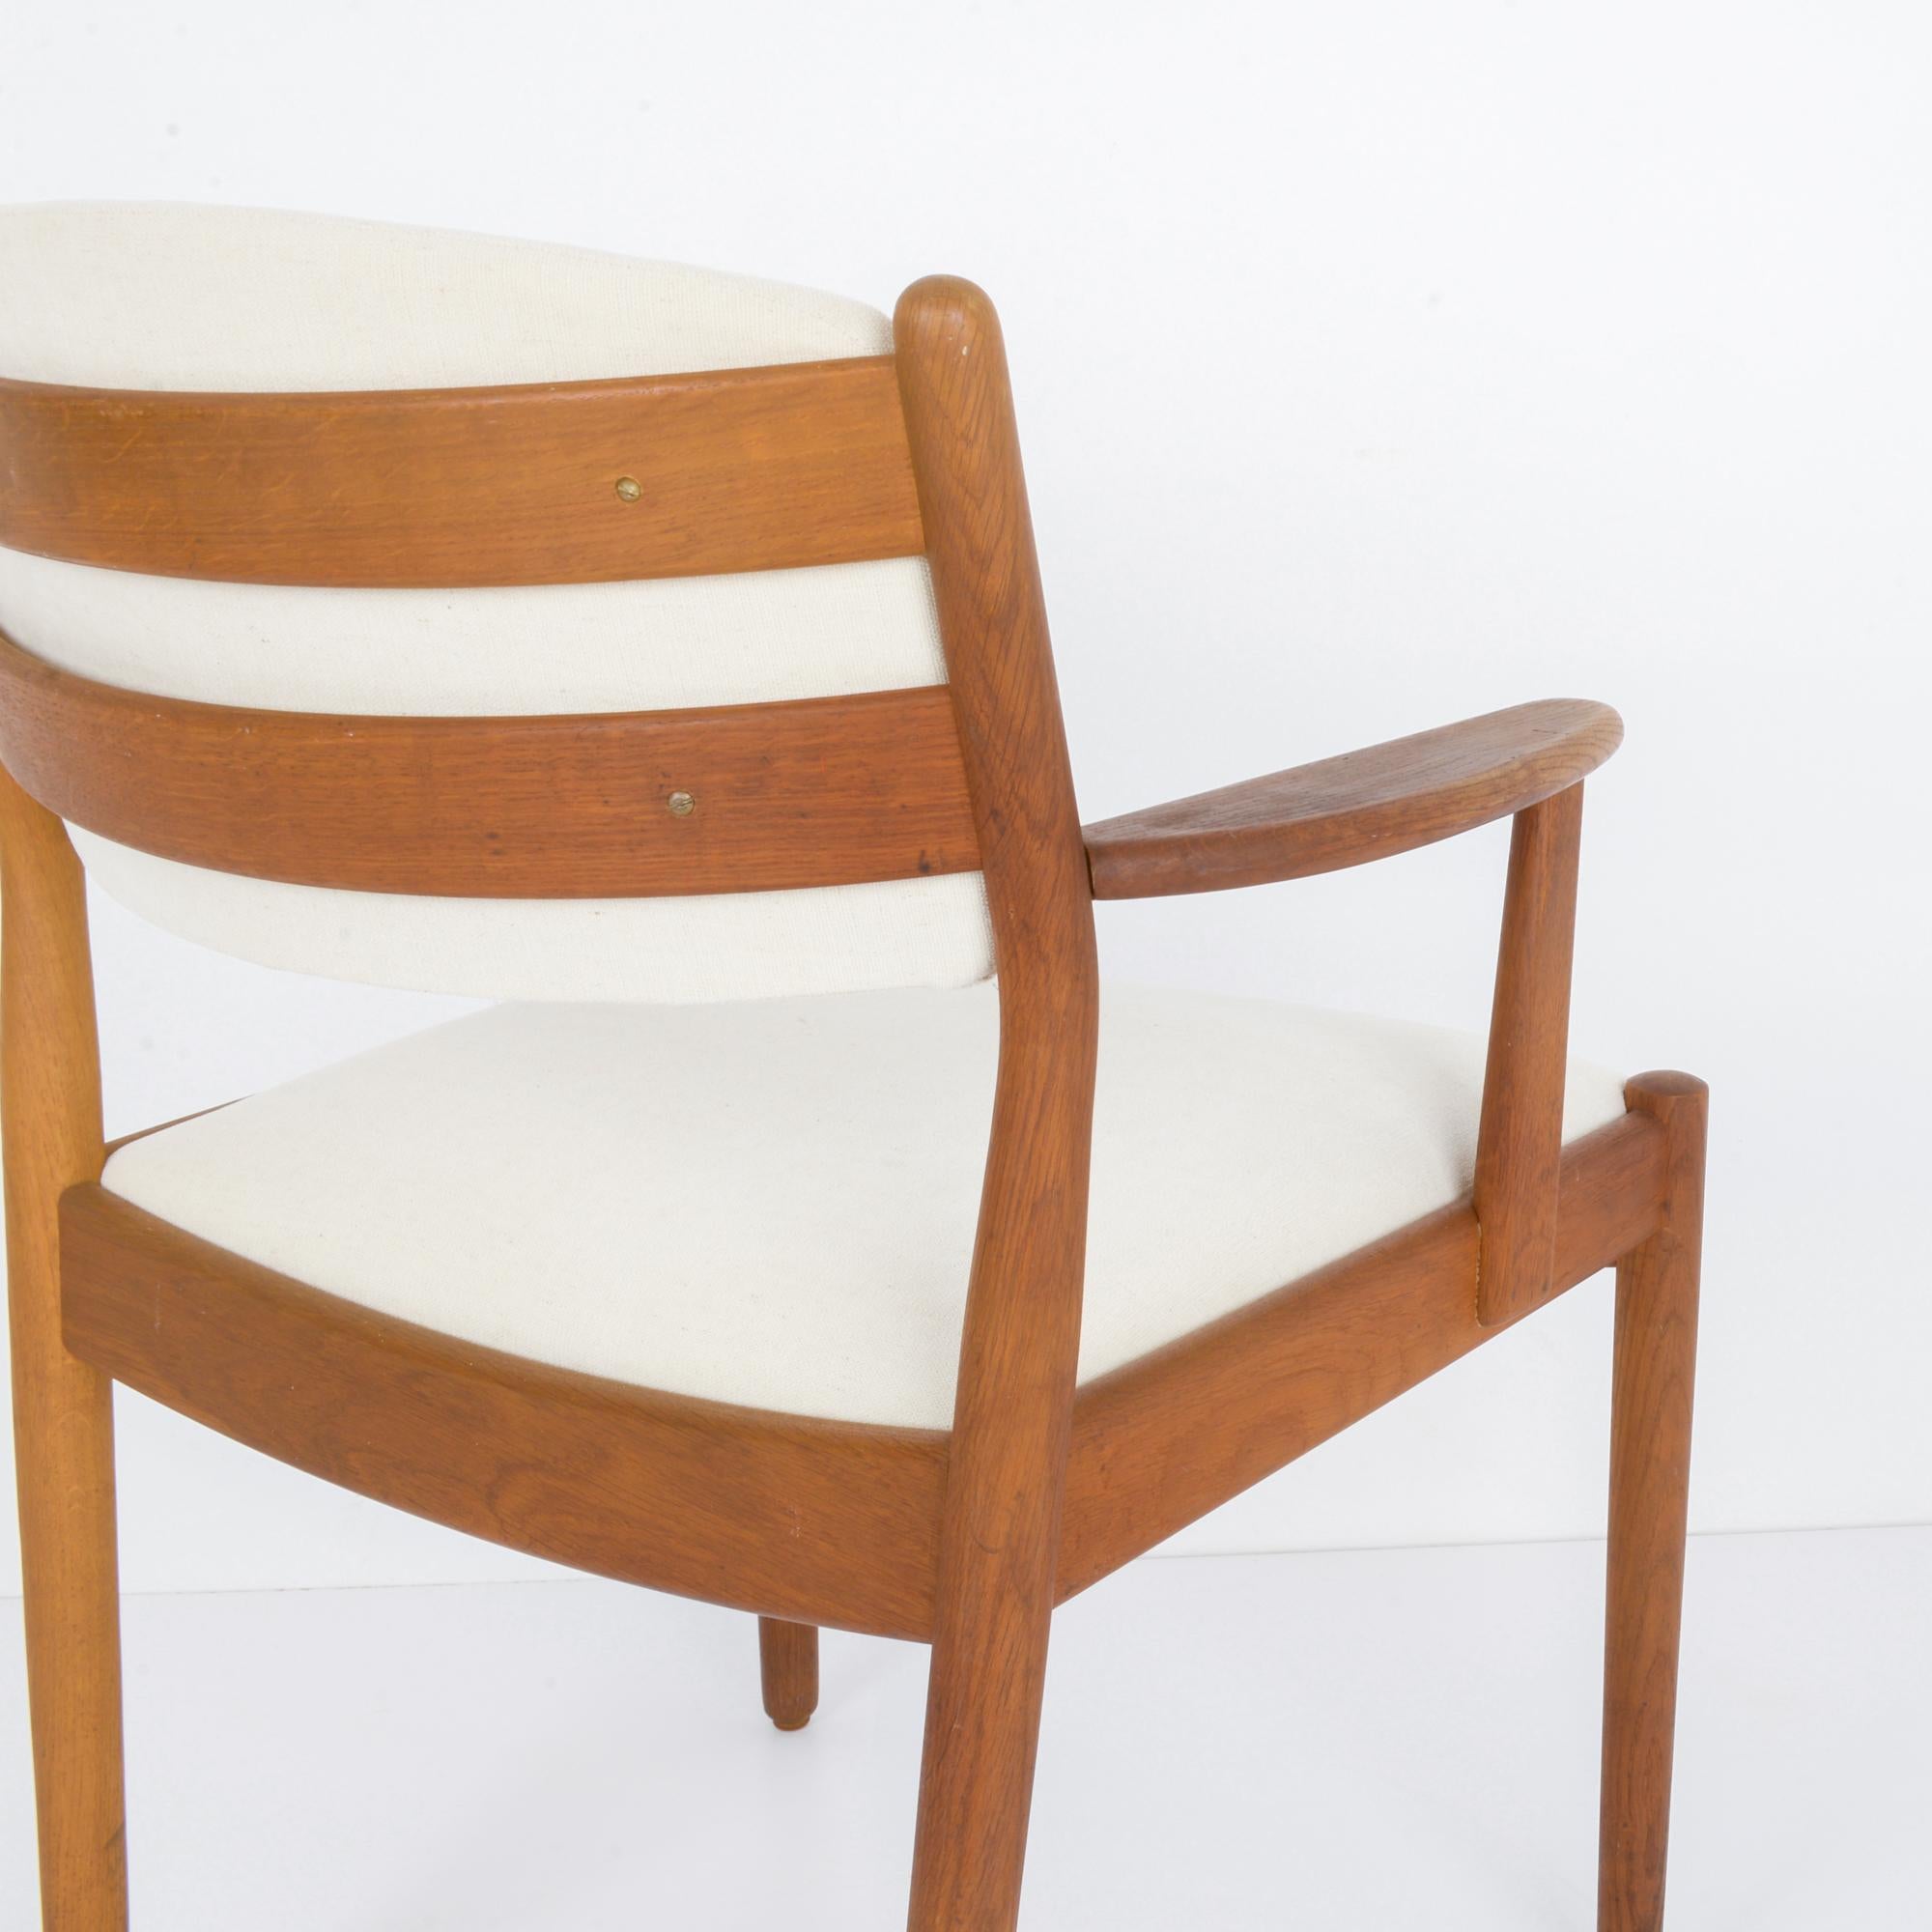 Mid-20th Century 1960s Danish Wooden Upholstered Armchair